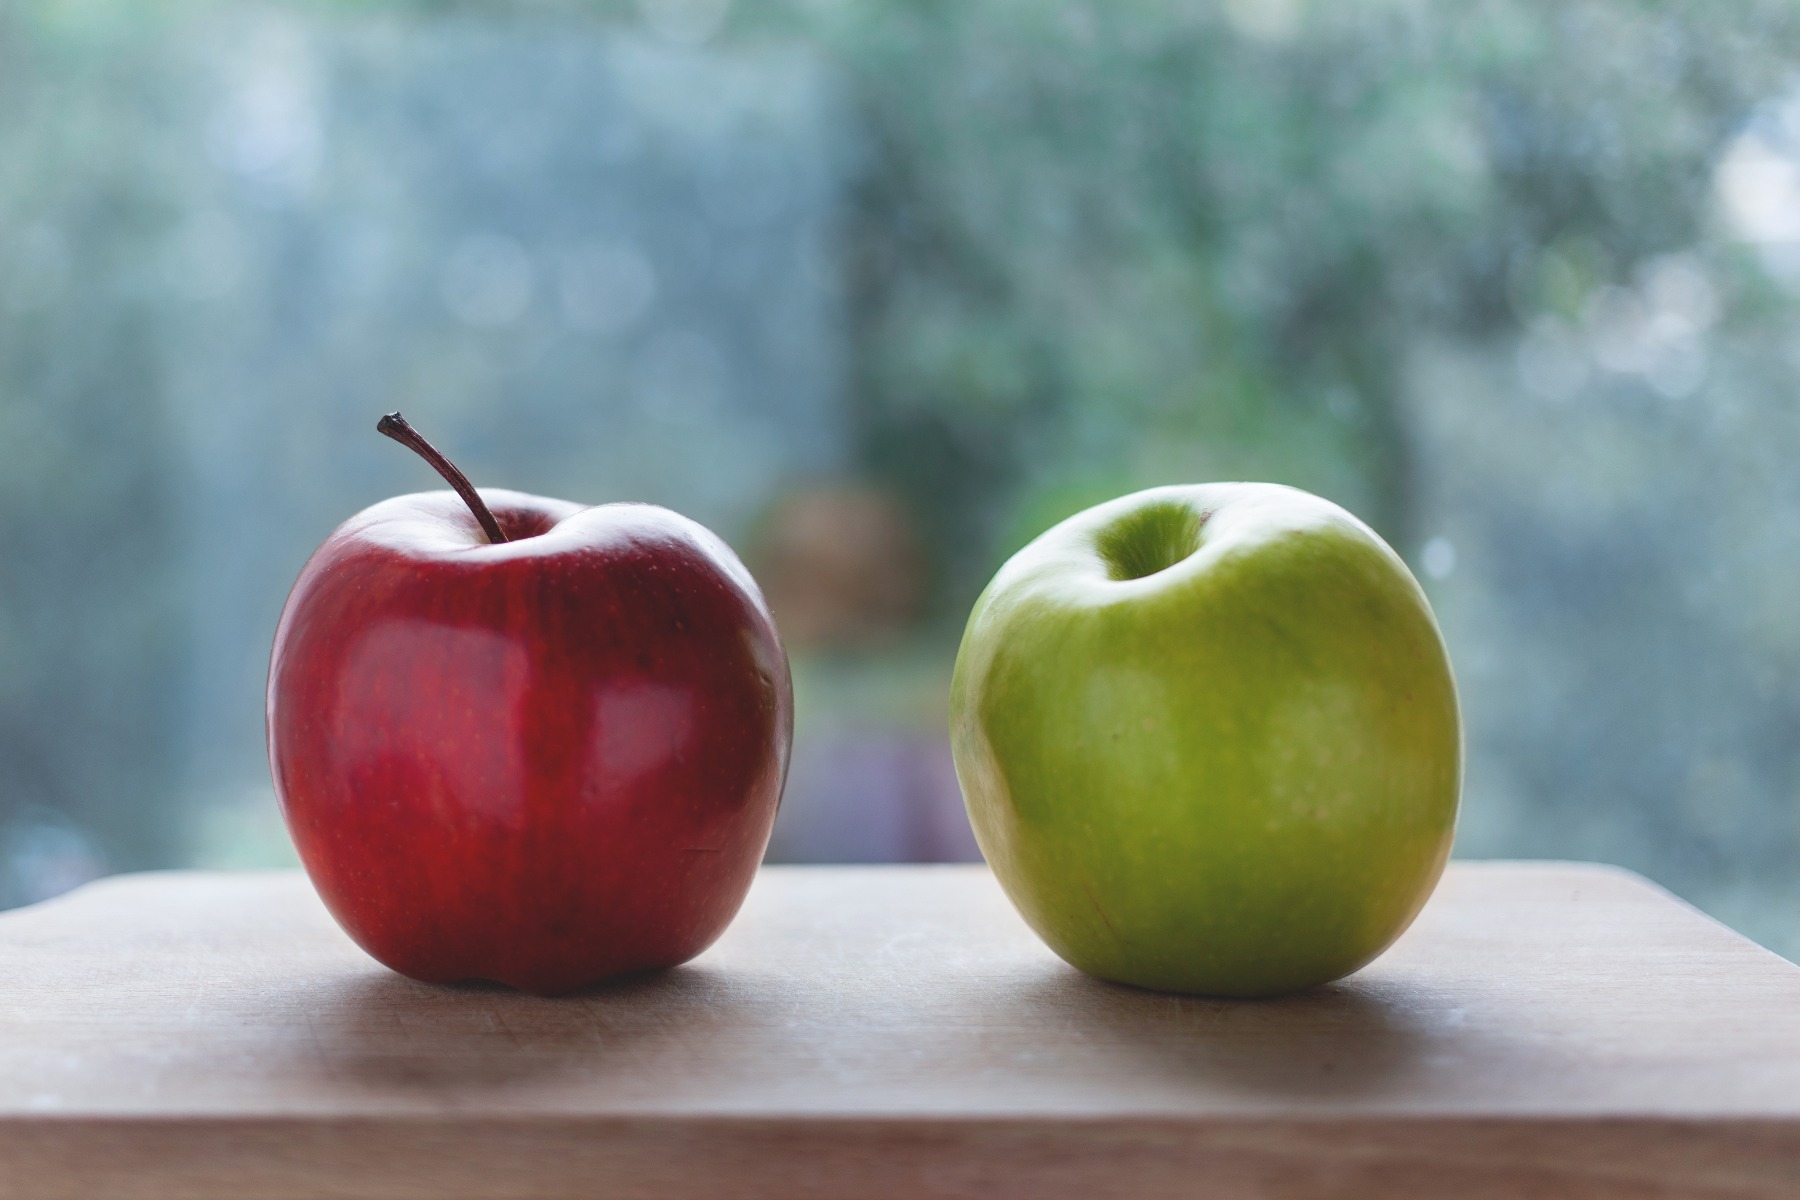 Graphic of Two apples. One is green and one is red.